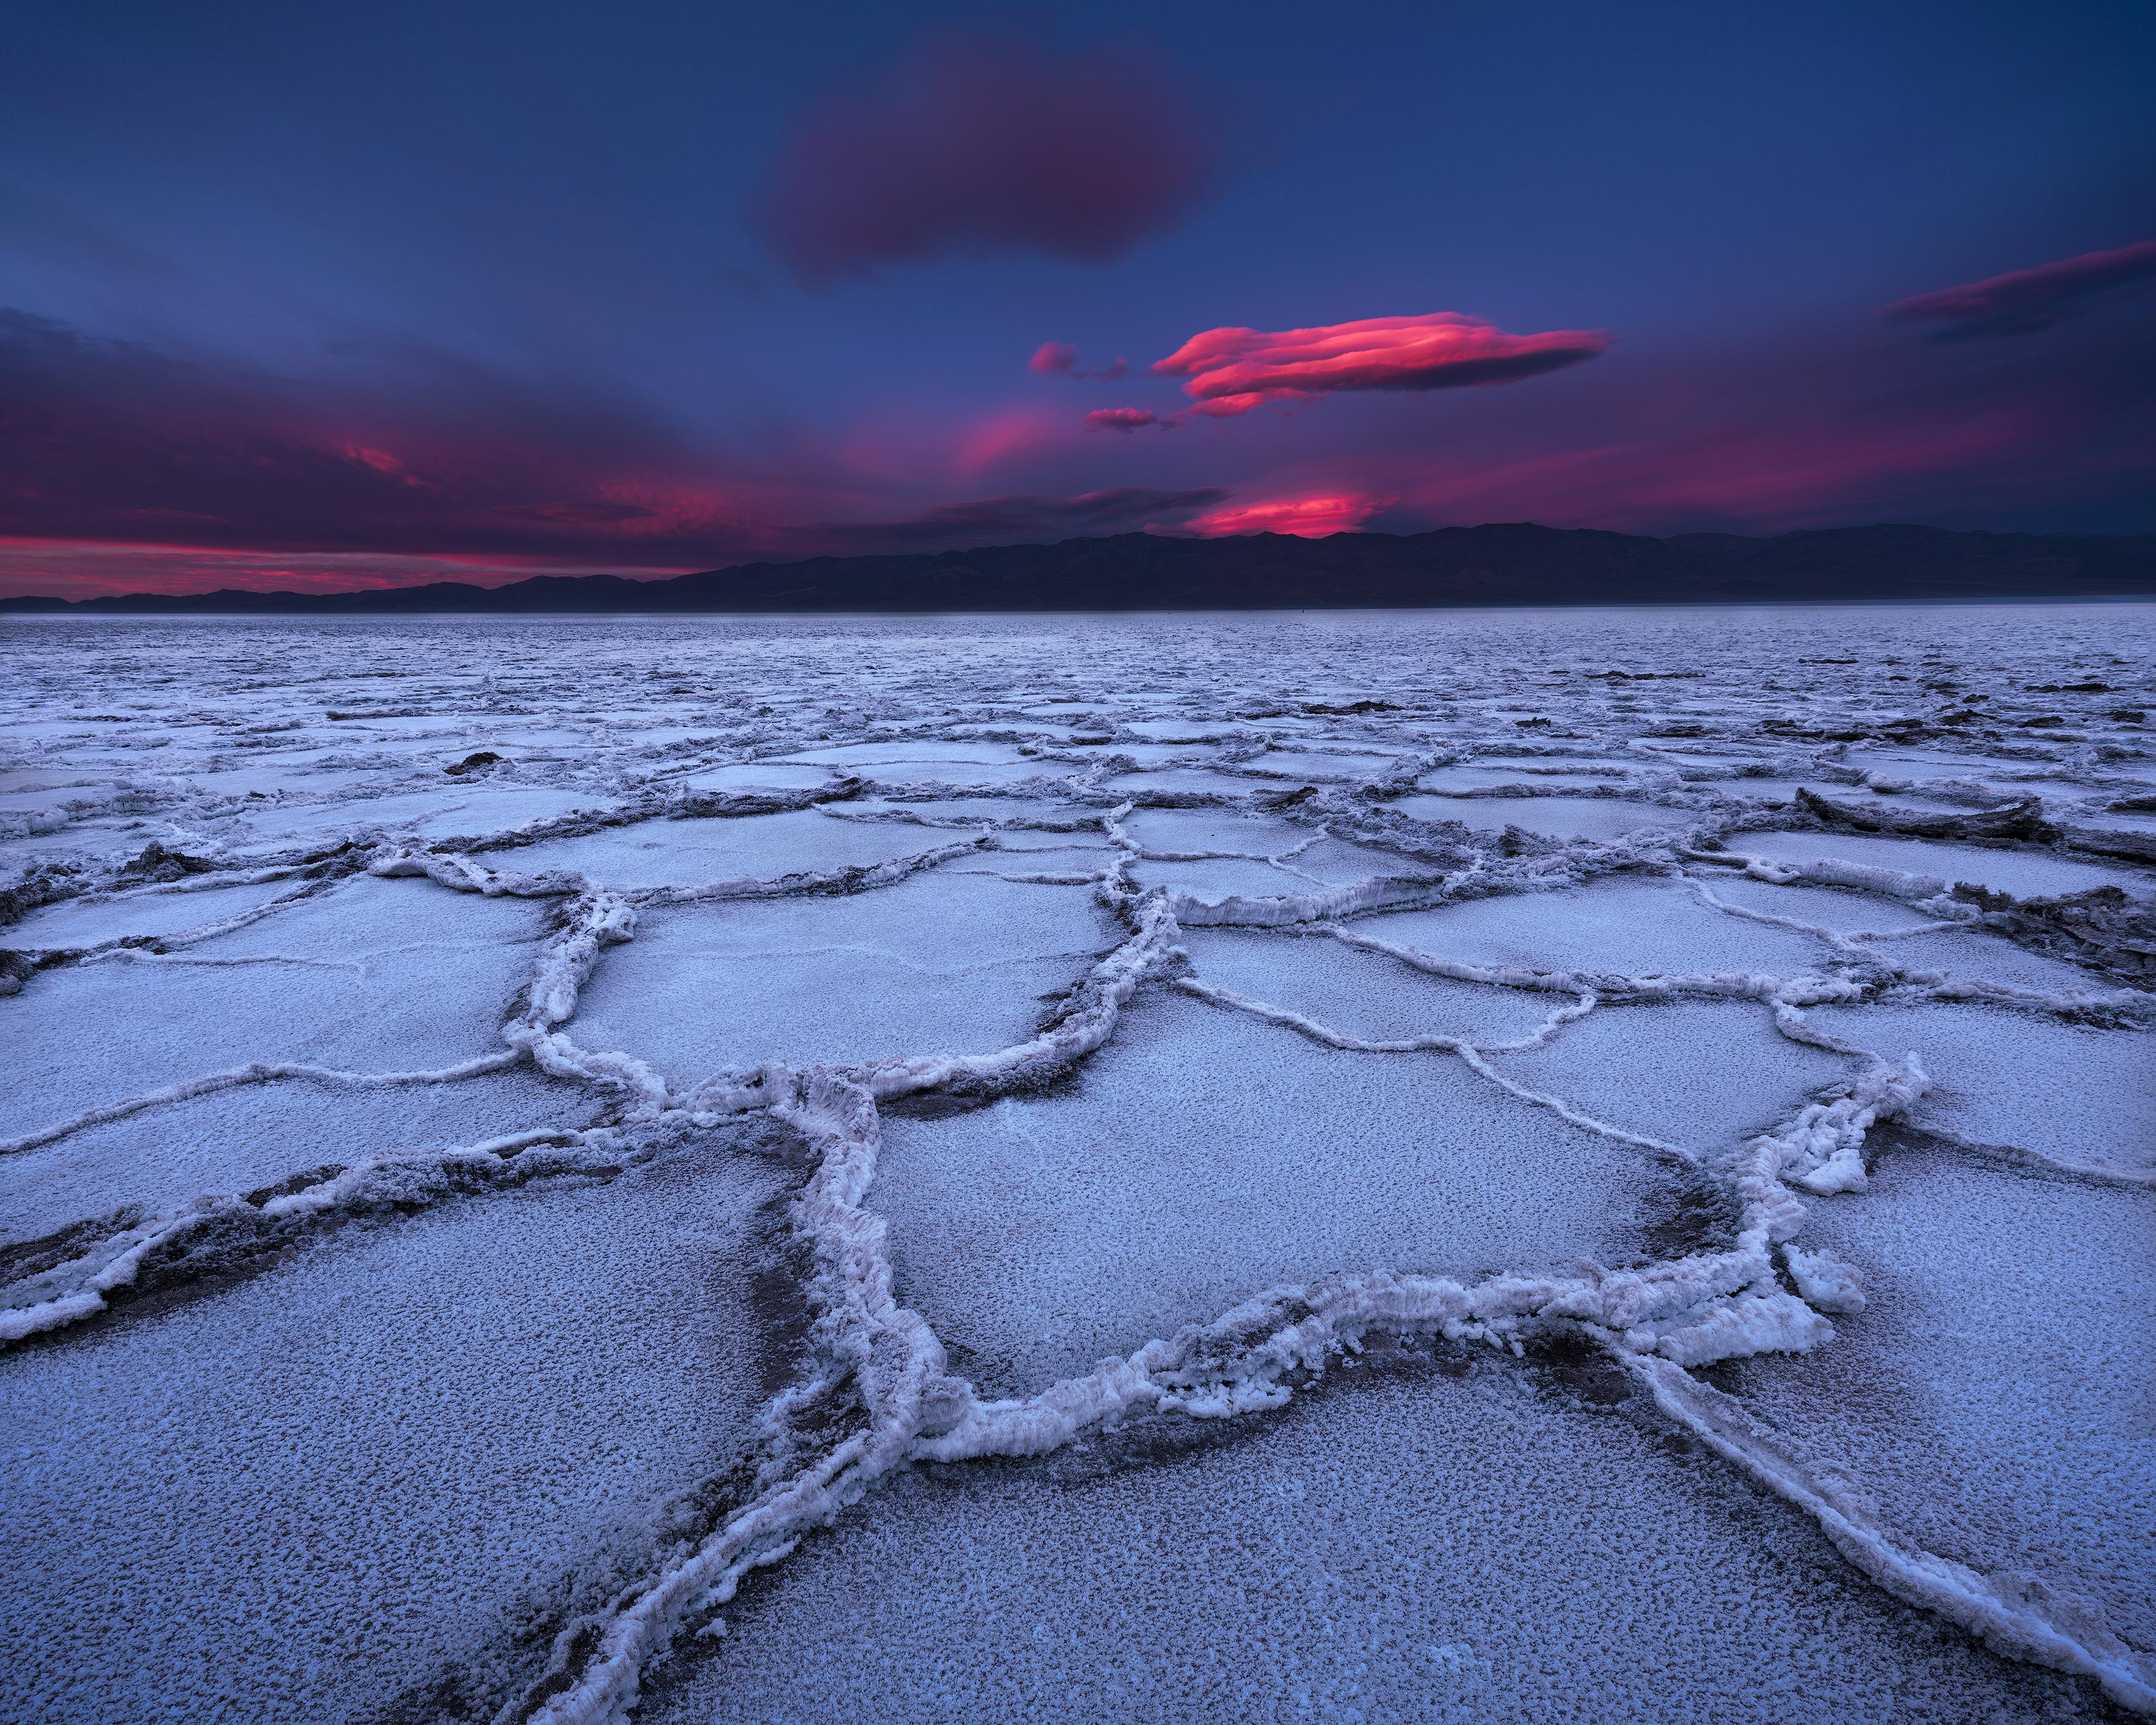 Ground-level view across a mosaic-like salt flat in Death Valley, with a dramatic sky overhead highlighted by vibrant pink clouds.